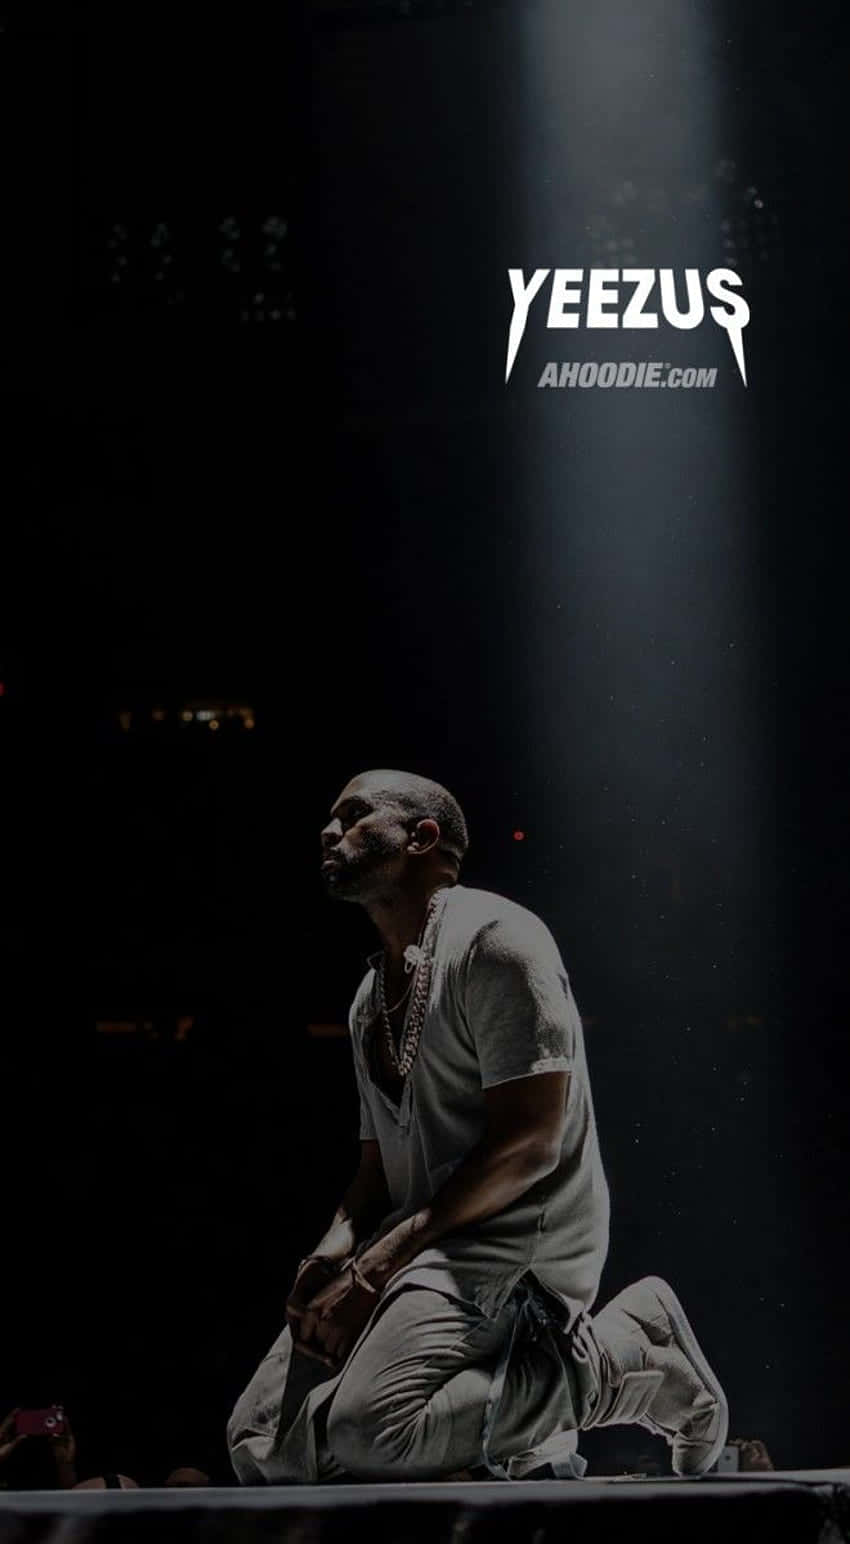 Looking to stay in the know with the newest technology? Check out the stylish Kanye Iphone. Wallpaper